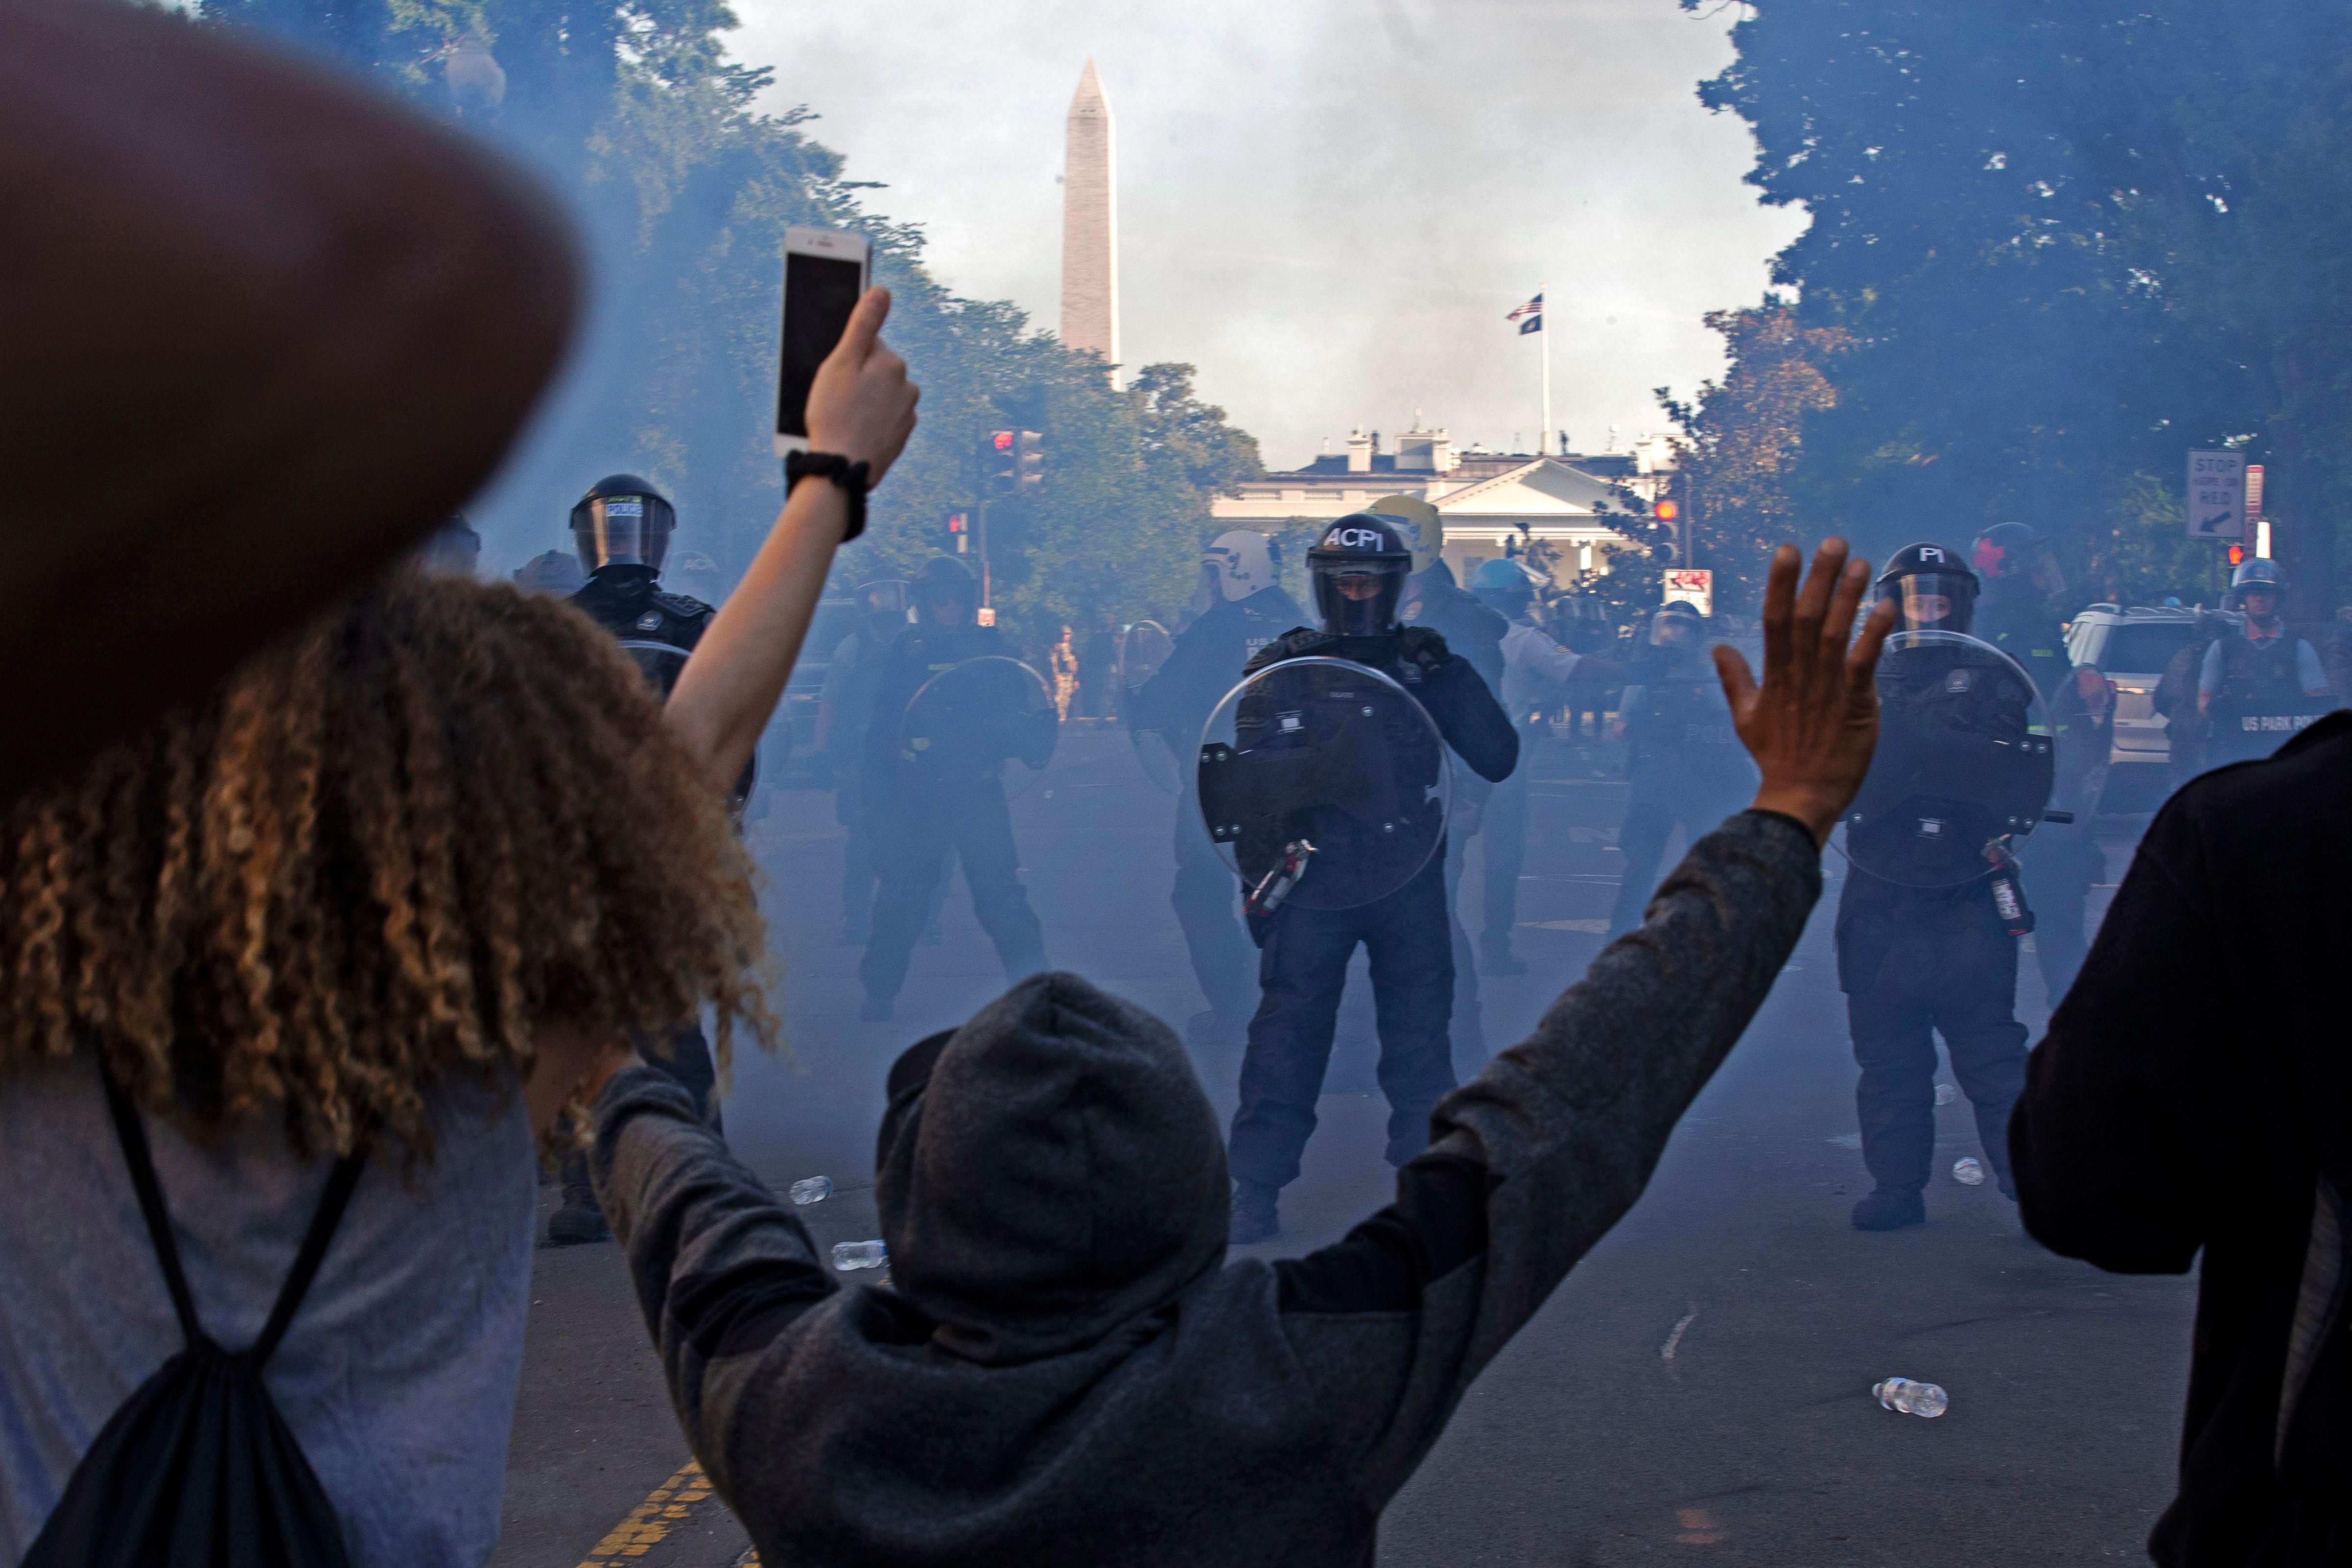 Protesters raise their hands as Secret Service officers can be seen through smoke on a street.